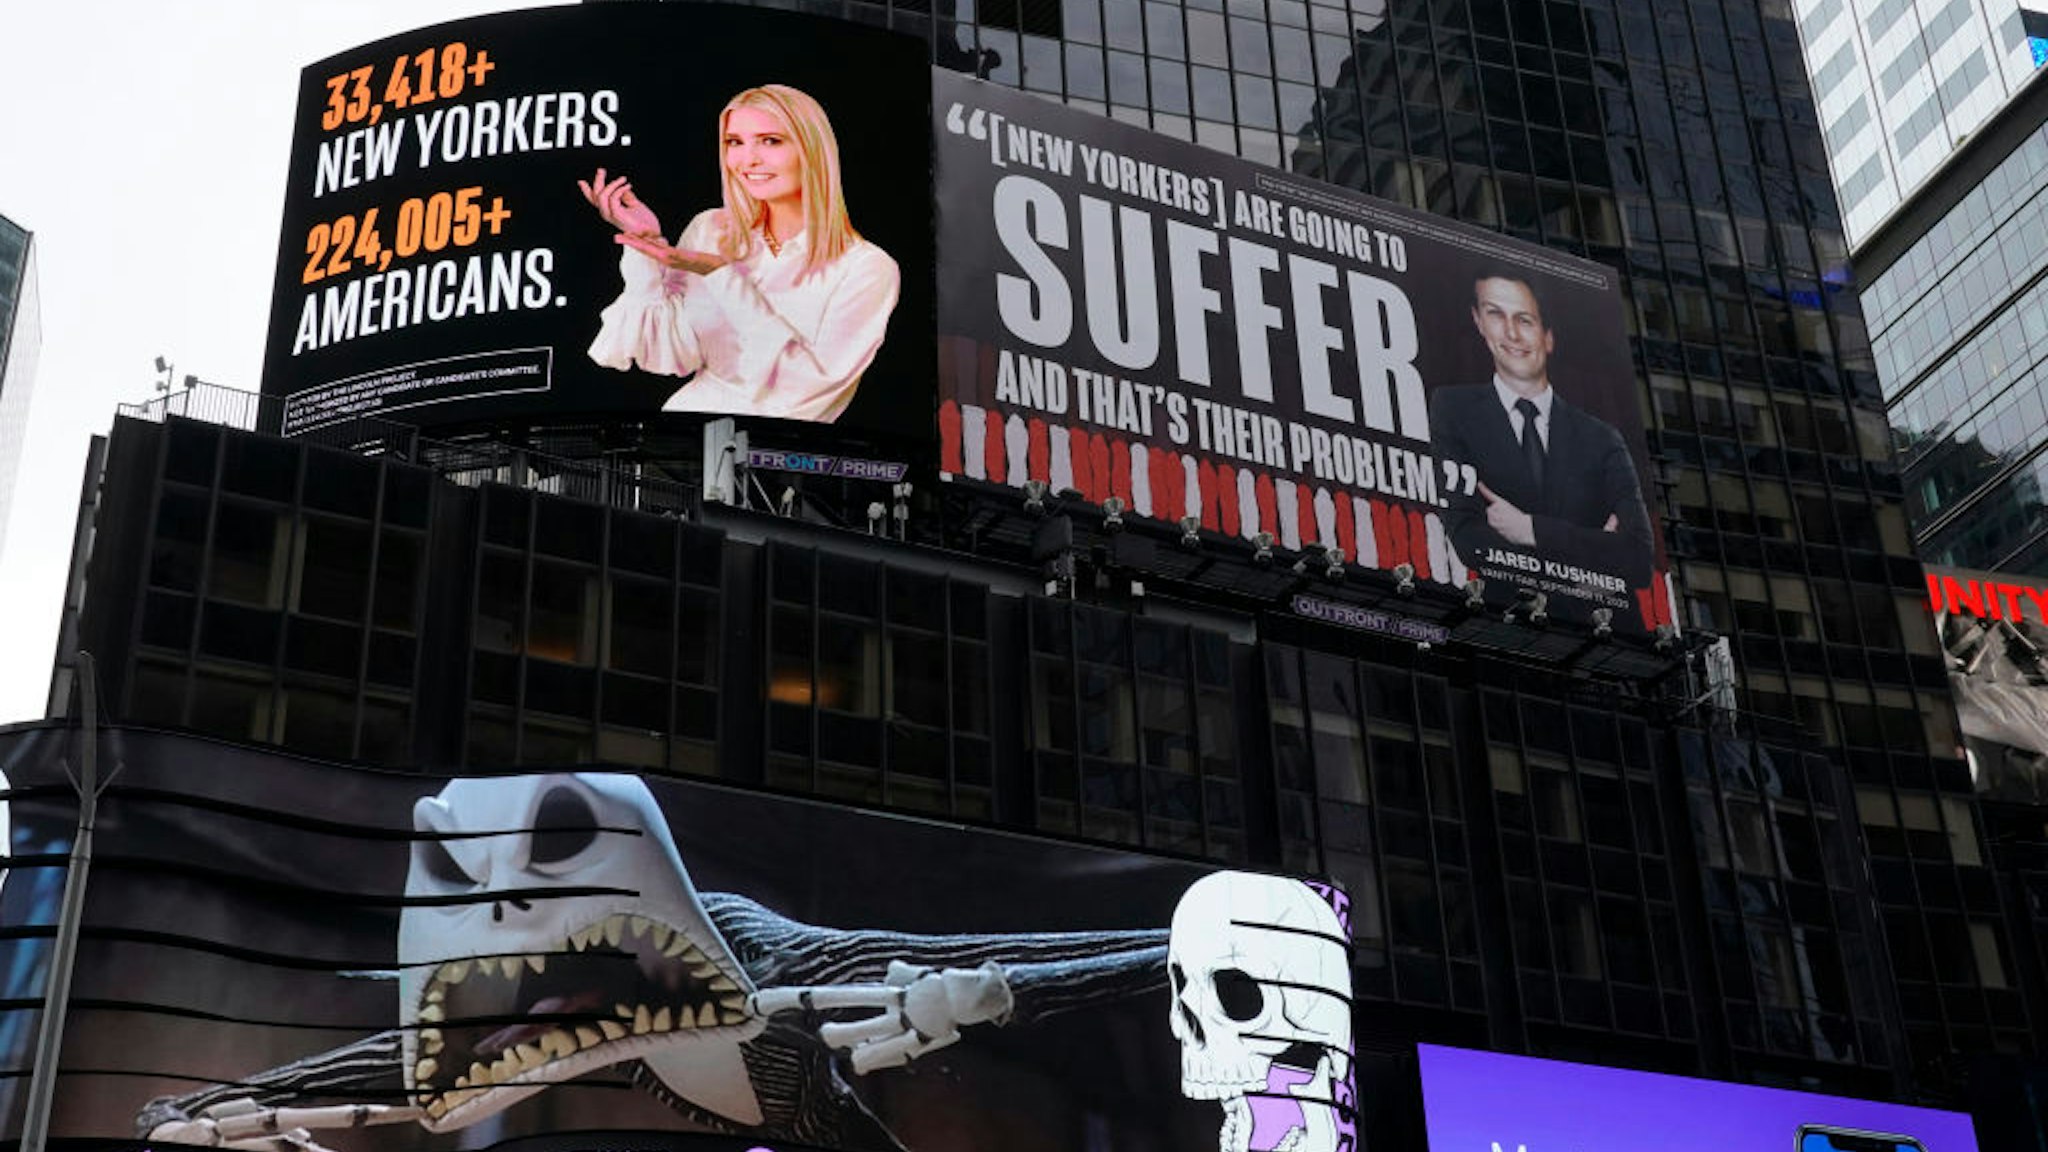 A billboard by The Lincoln Project is seen in Times Square on October 25, 2020 in New York, depicting Ivanka Trump presenting the number of New Yorkers and Americans who have died due to Covid-19 along with her husband Senior Advisor to the President Jared Kushner, with a Vanity Fair quote. - The Lincoln Project, is defending its right to erect billboards in Times Square critical of Ivanka Trump and Jared Kushner,after an attorney for President Trump's daughter and her husband threatened to sue. (Photo by TIMOTHY A. CLARY / AFP) (Photo by TIMOTHY A. CLARY/AFP via Getty Images)